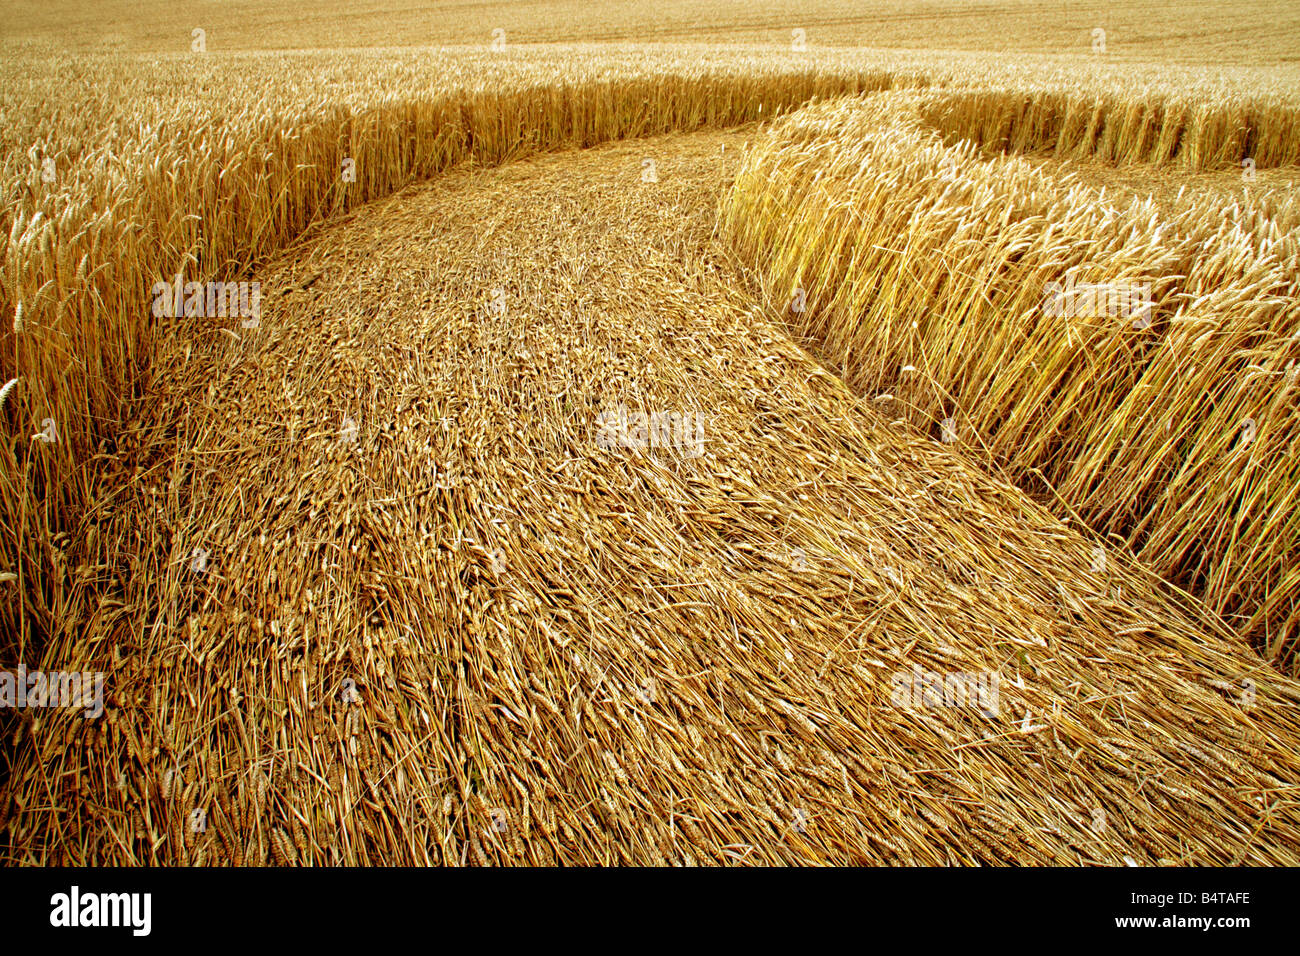 Part of a crop cicle cut into a wheat field Stock Photo